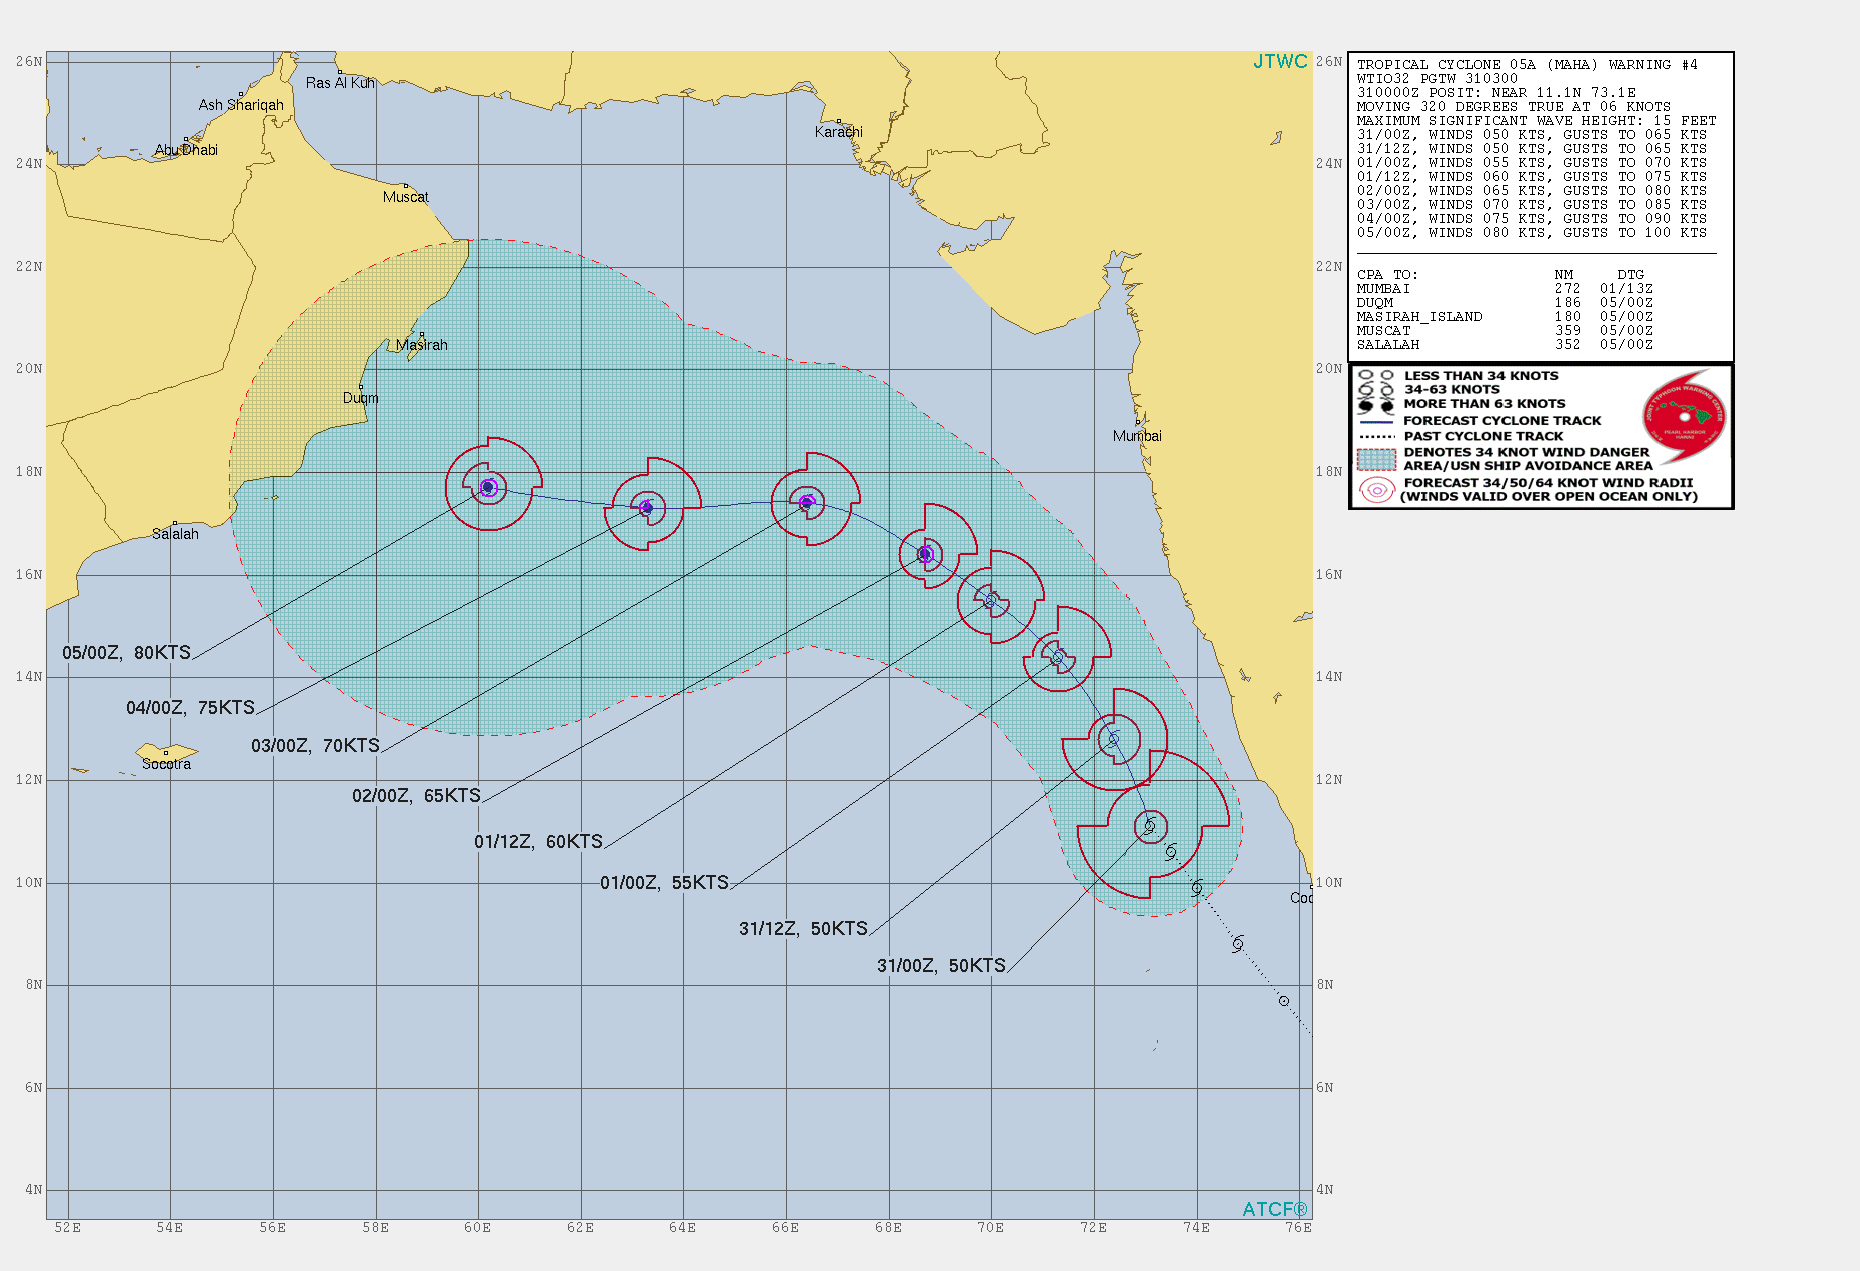 TC 05A: FORECAST TO REACH TYPHOON INTENSITY WITHIN 48H